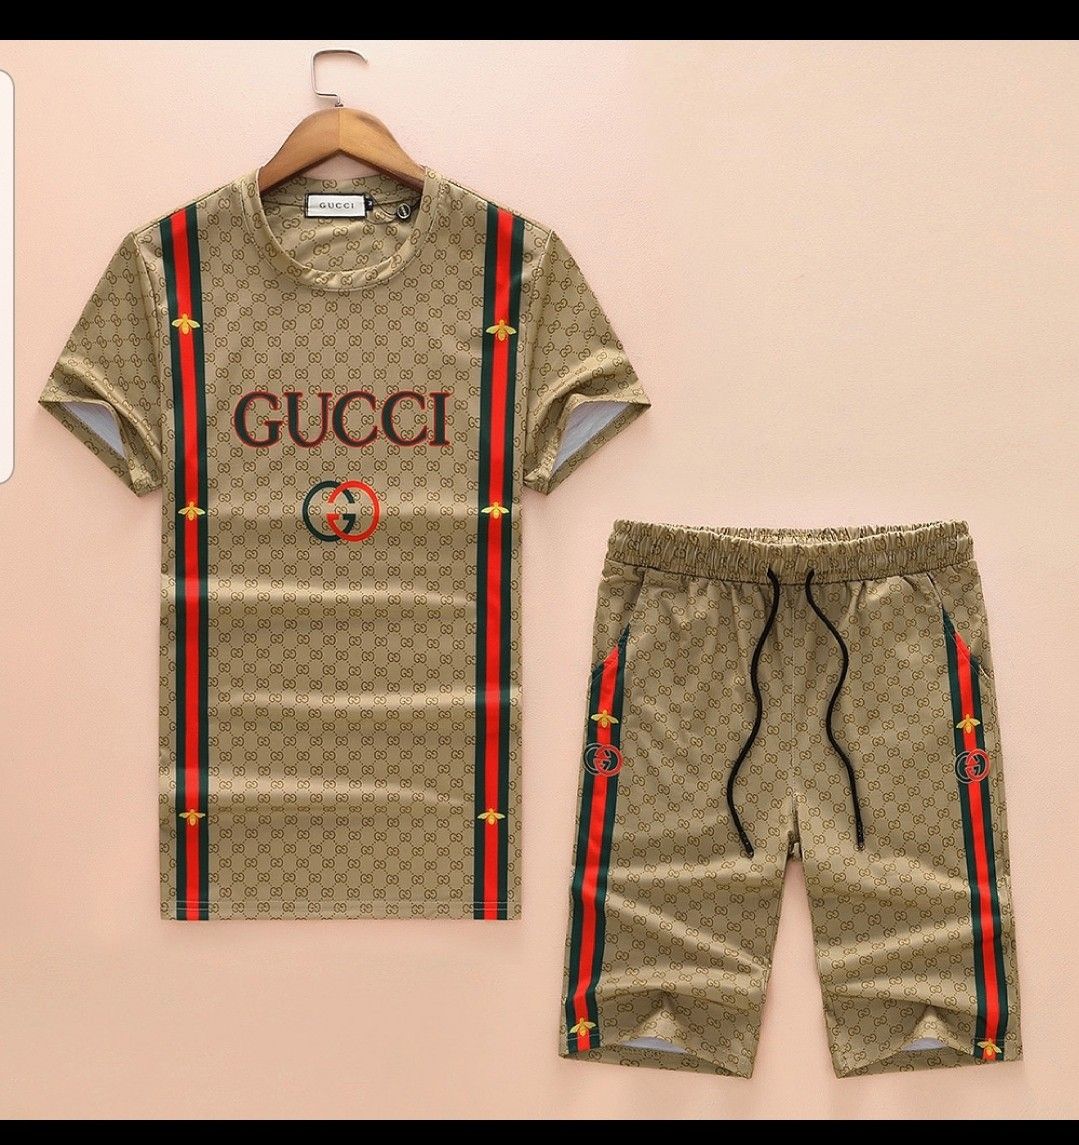 Gucci for Sale in Ontario, CA - OfferUp